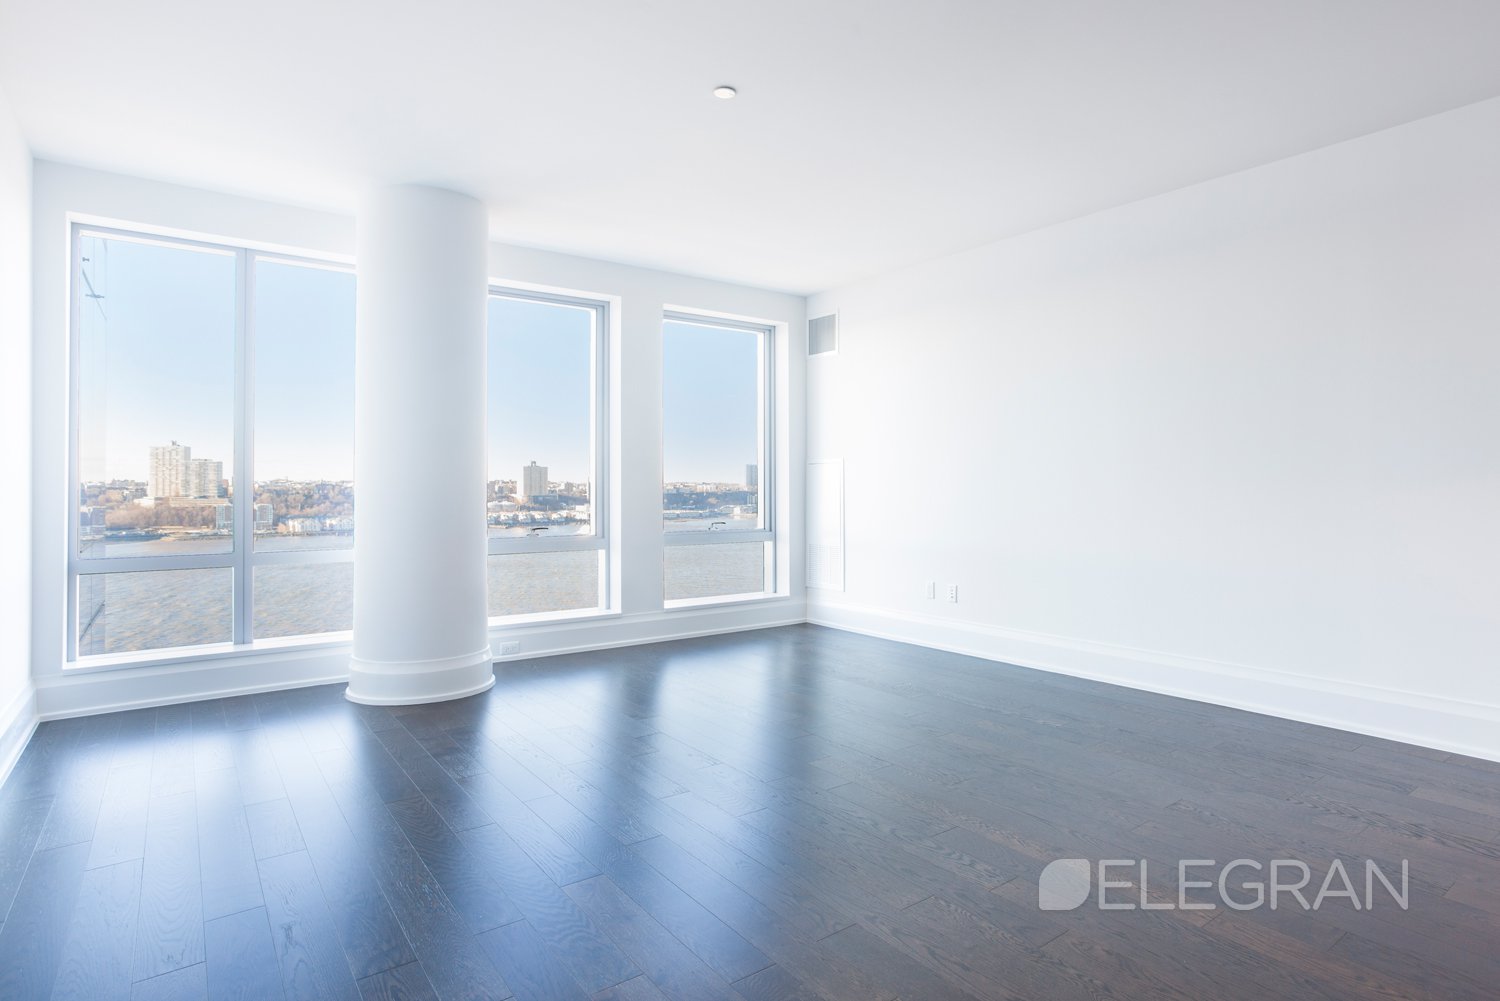 50 Riverside Boulevard 20-D, Lincoln Square, Upper West Side, NYC - 2 Bedrooms  
3.5 Bathrooms  
4 Rooms - 